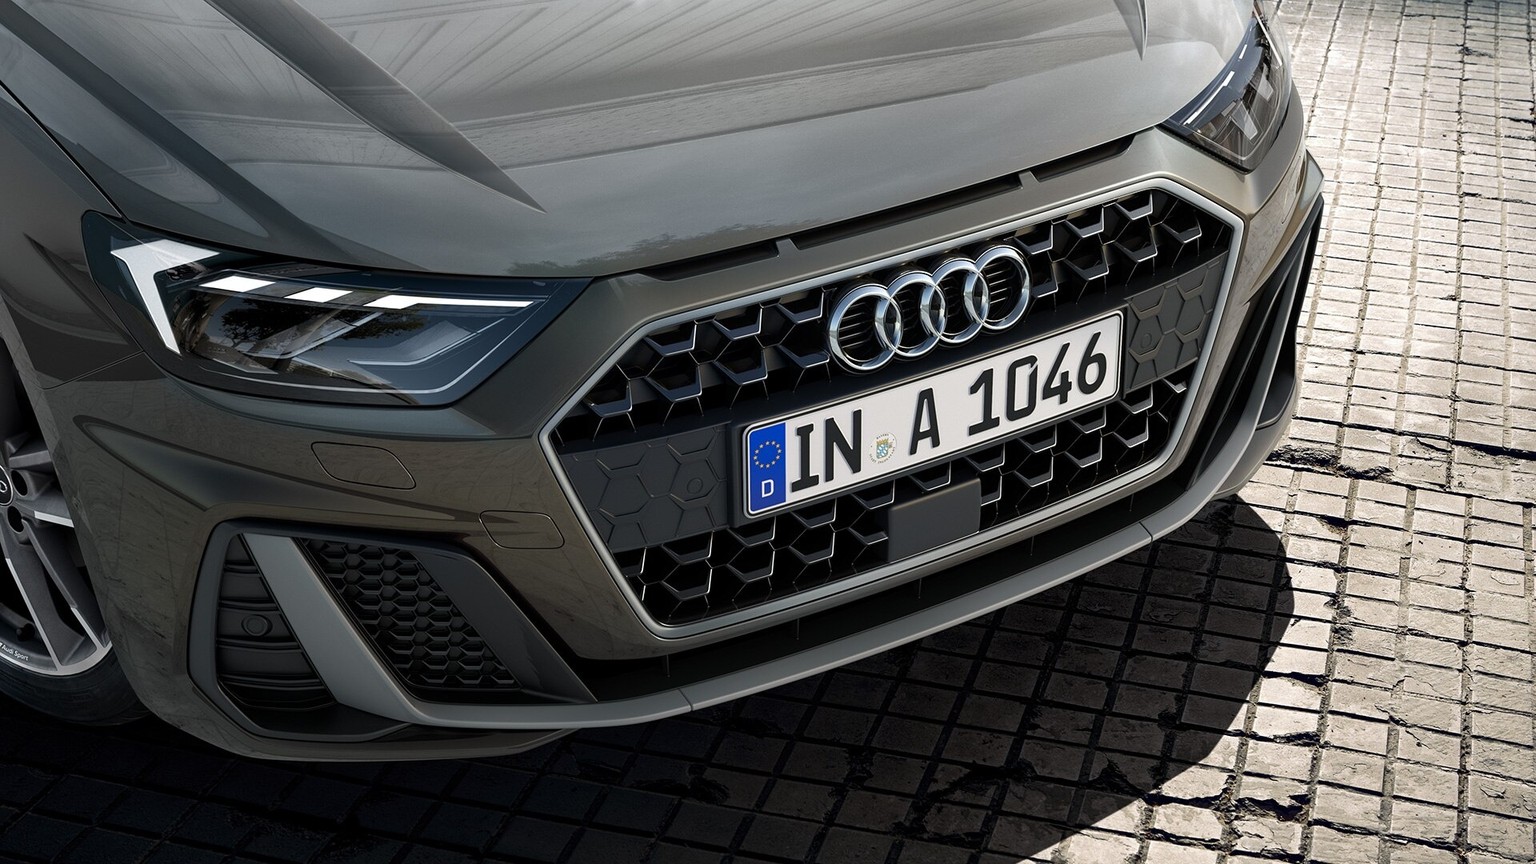 The wide track and short overhangs of the all-new Audi A1 Sportback provide for a taut, sporty look. The wide, low-placed Singleframe grille and the implied side air inlets dominate the distinctive front. Overseas model with optional equipment shown.